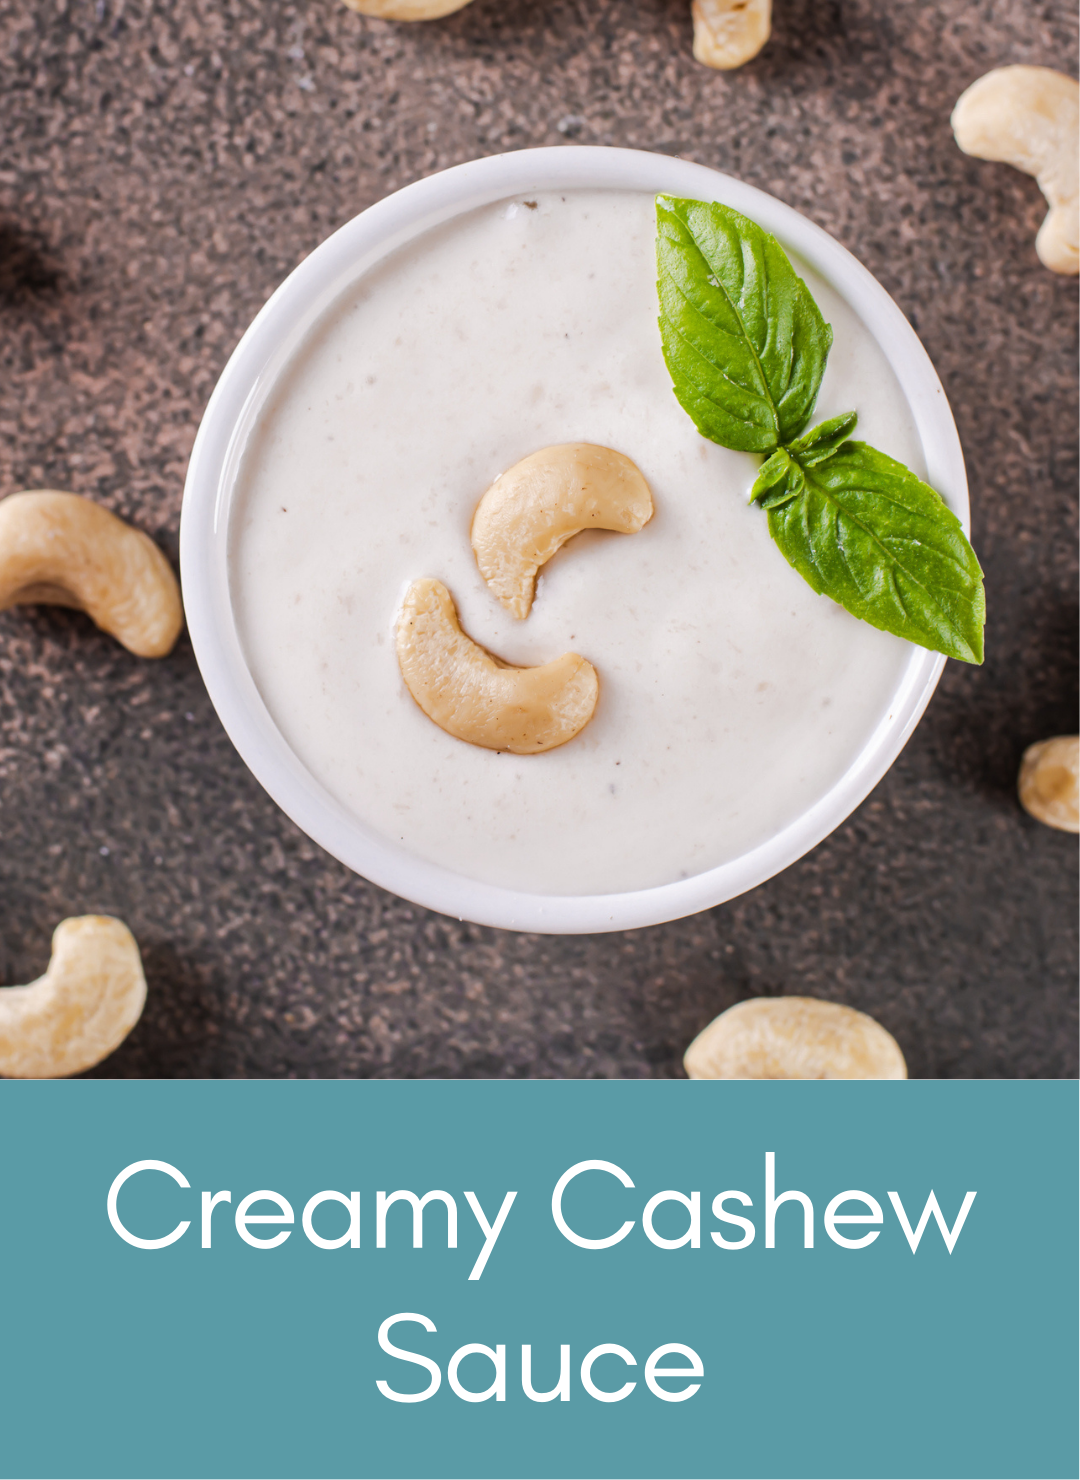 Creamy vegan cashew sauce Picture with link to recipe